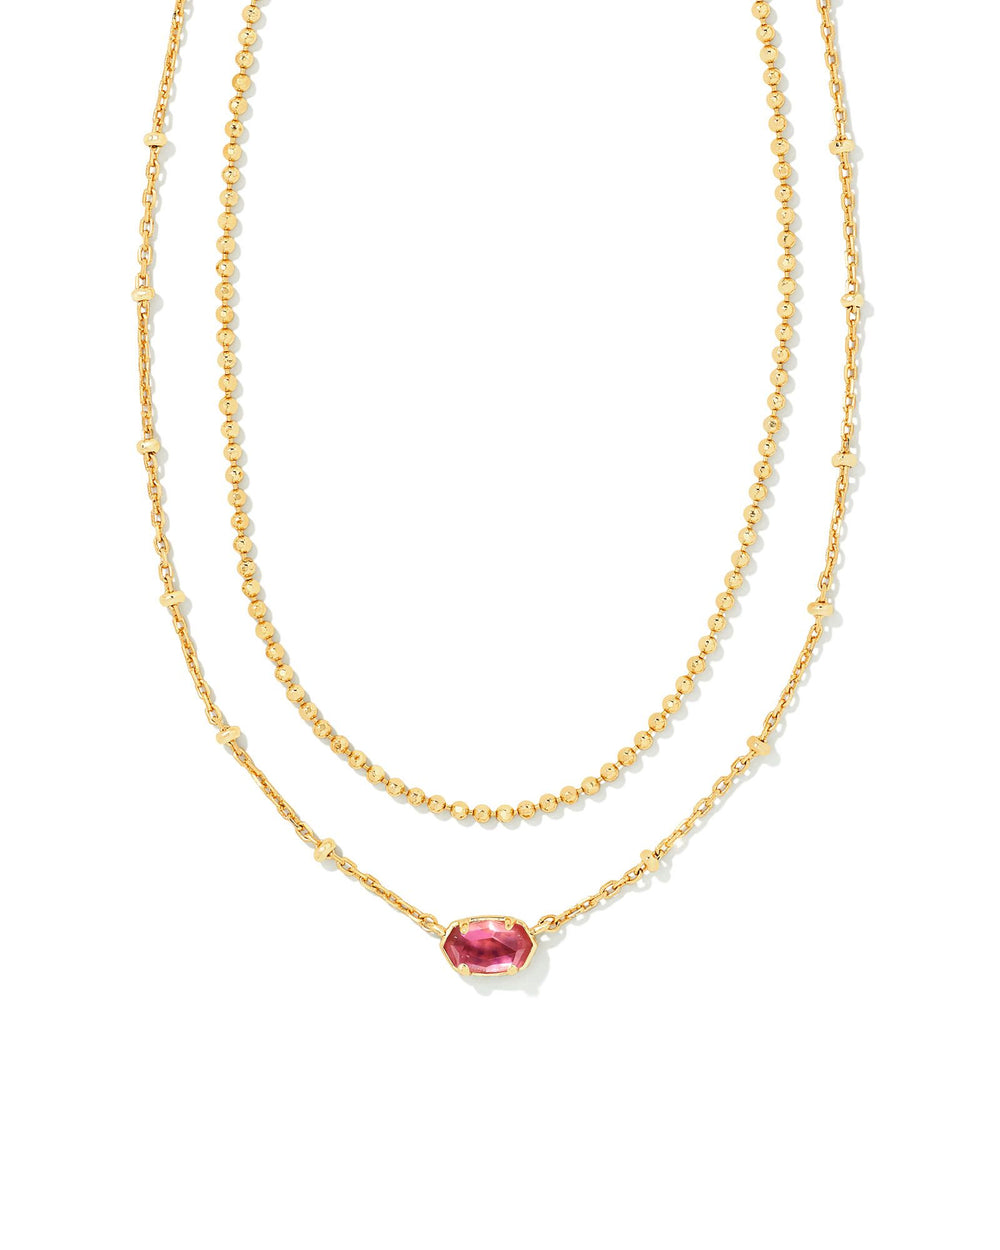 Emilie Gold Multi Strand Necklace in Burgundy Illusion